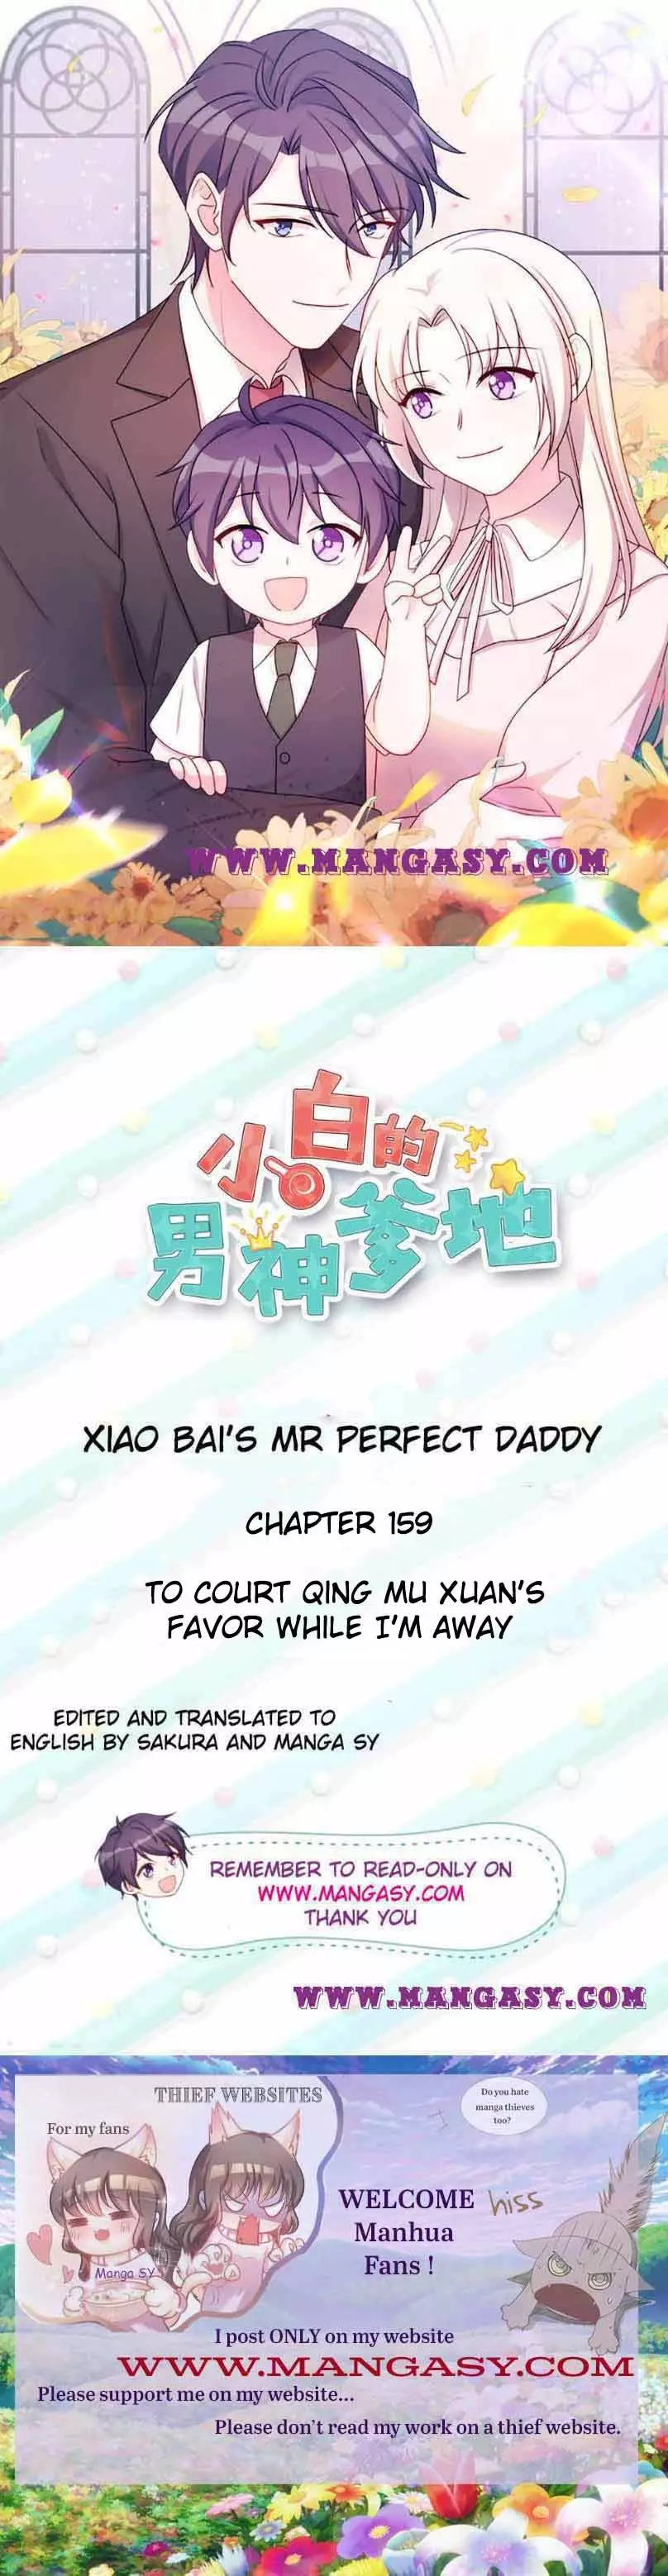 Xiao Bai’S Father Is A Wonderful Person - 159 page 1-4ef99275